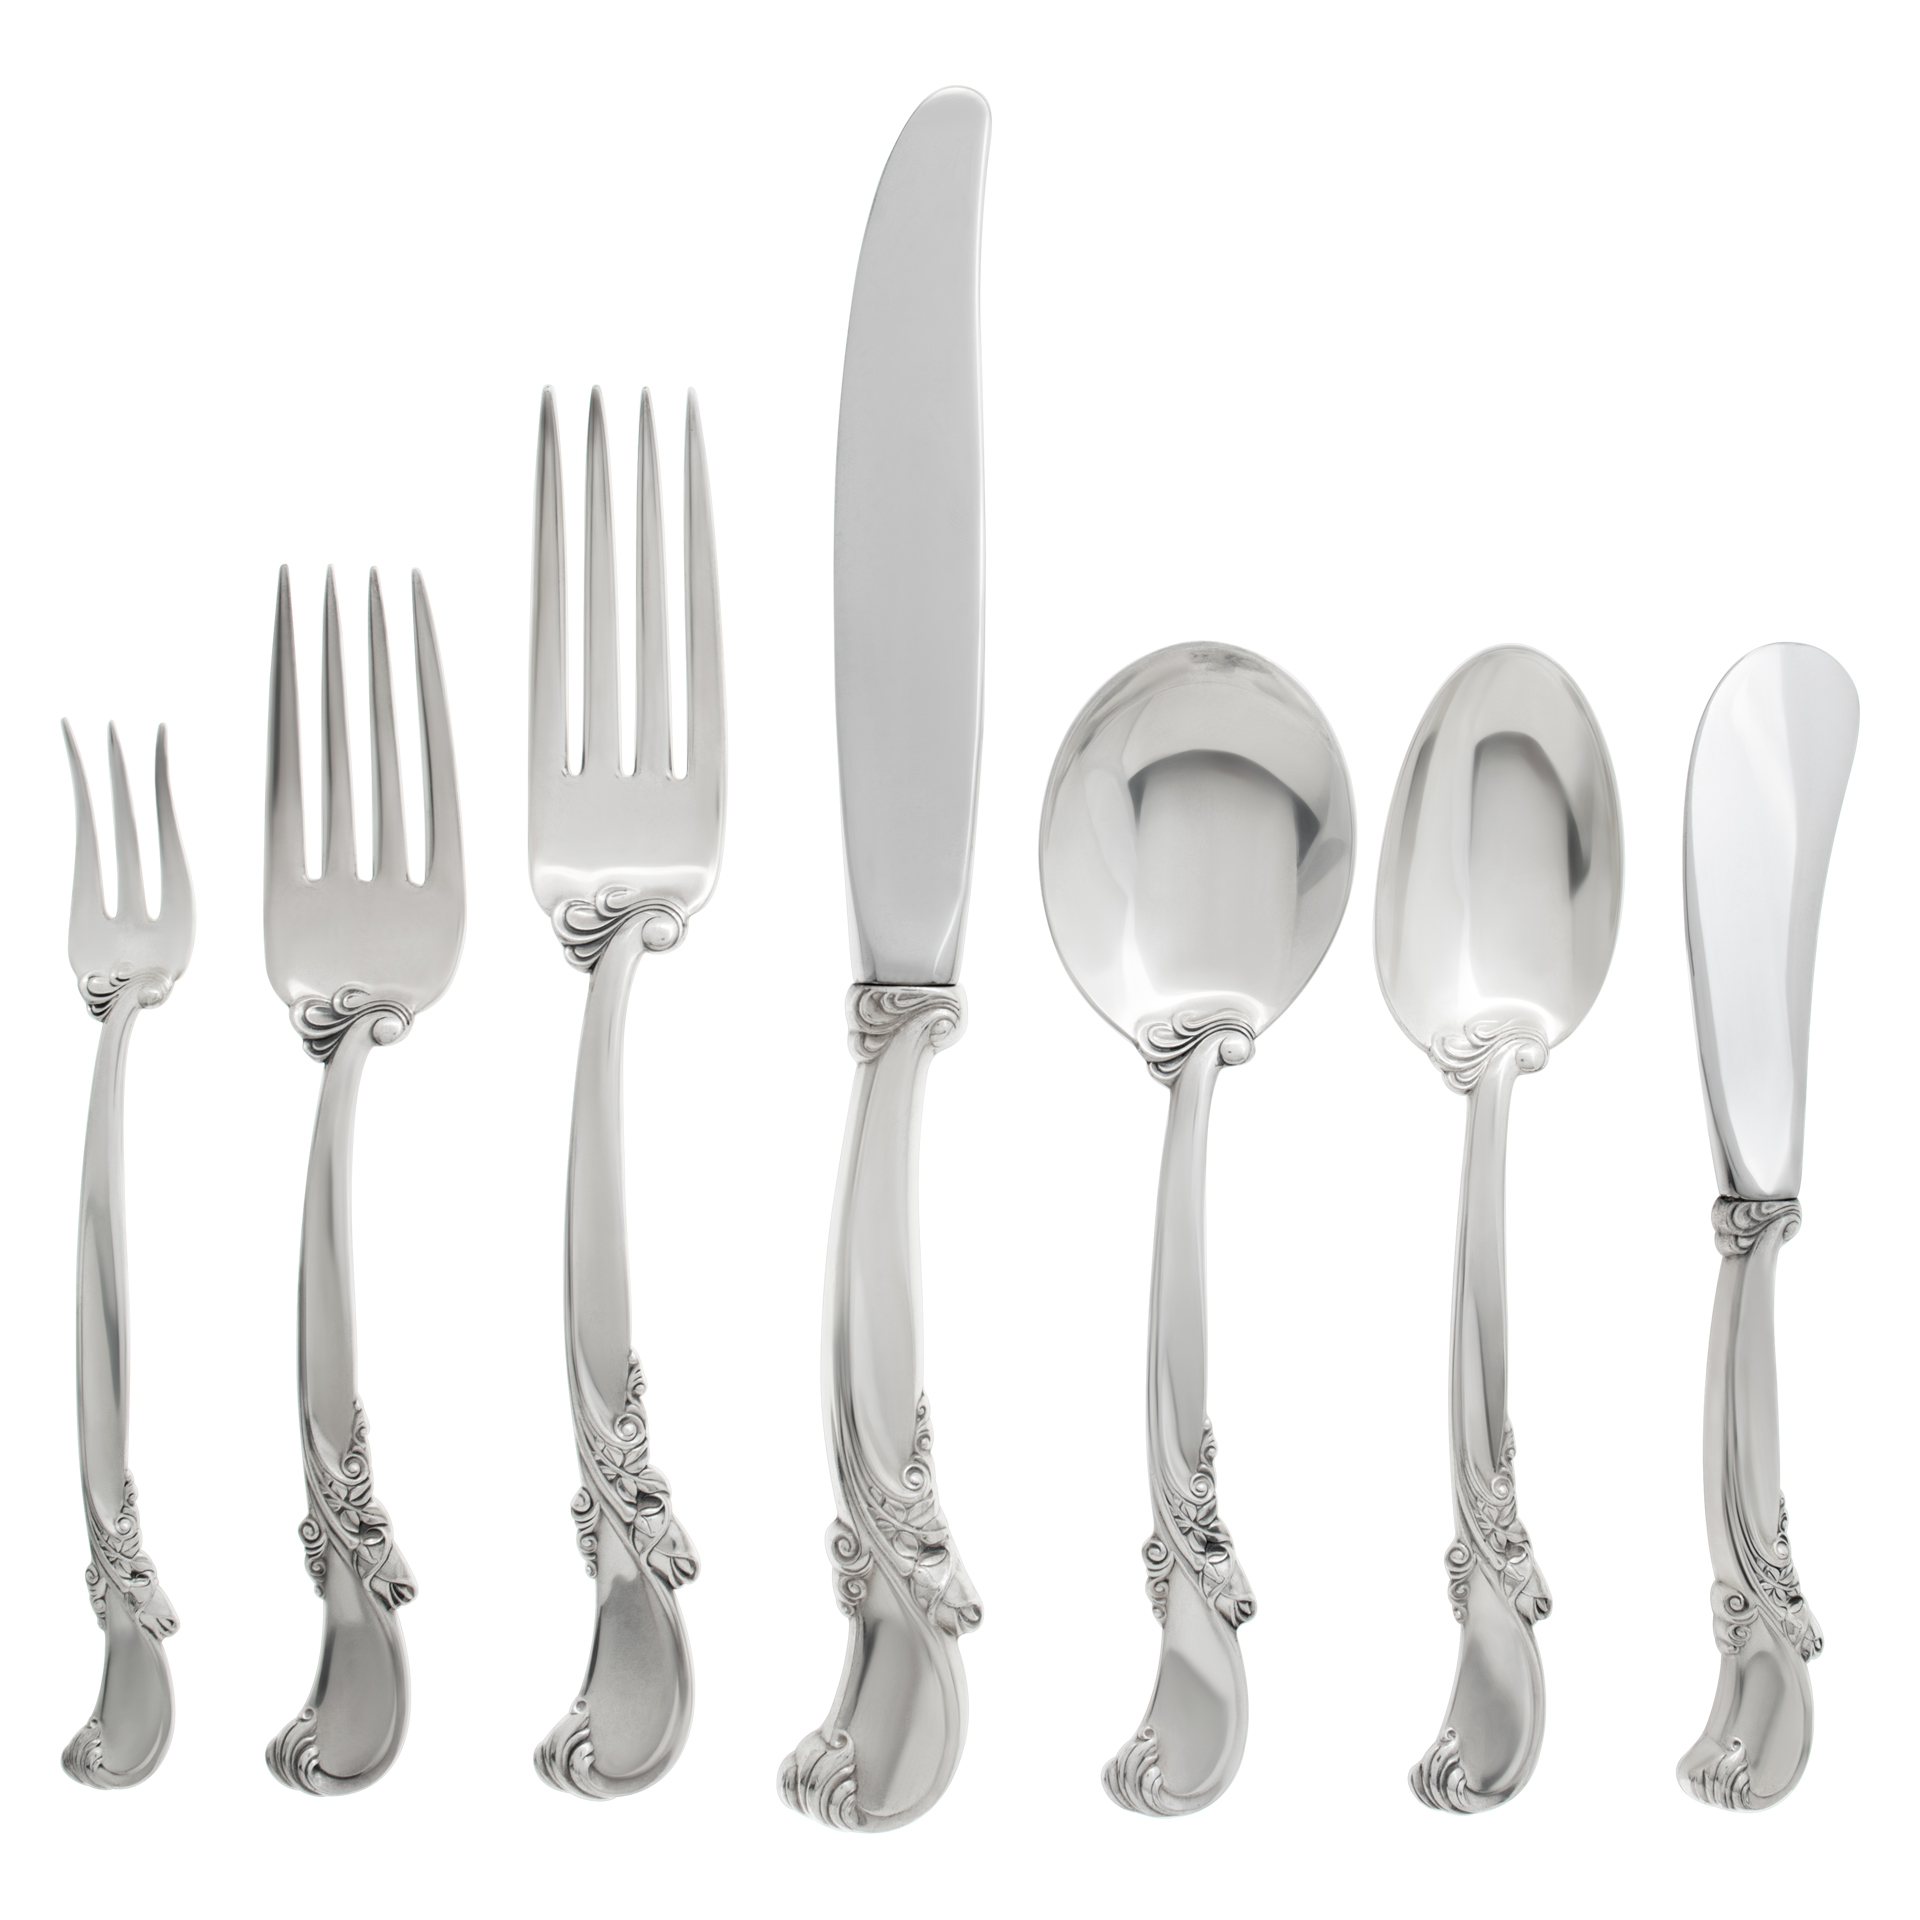 WALTZ OF SPRING, 74 pieces, sterling silver flatware set, patented by Wallace in 1952. 6 place setting for 12 + 2 serving pieces.